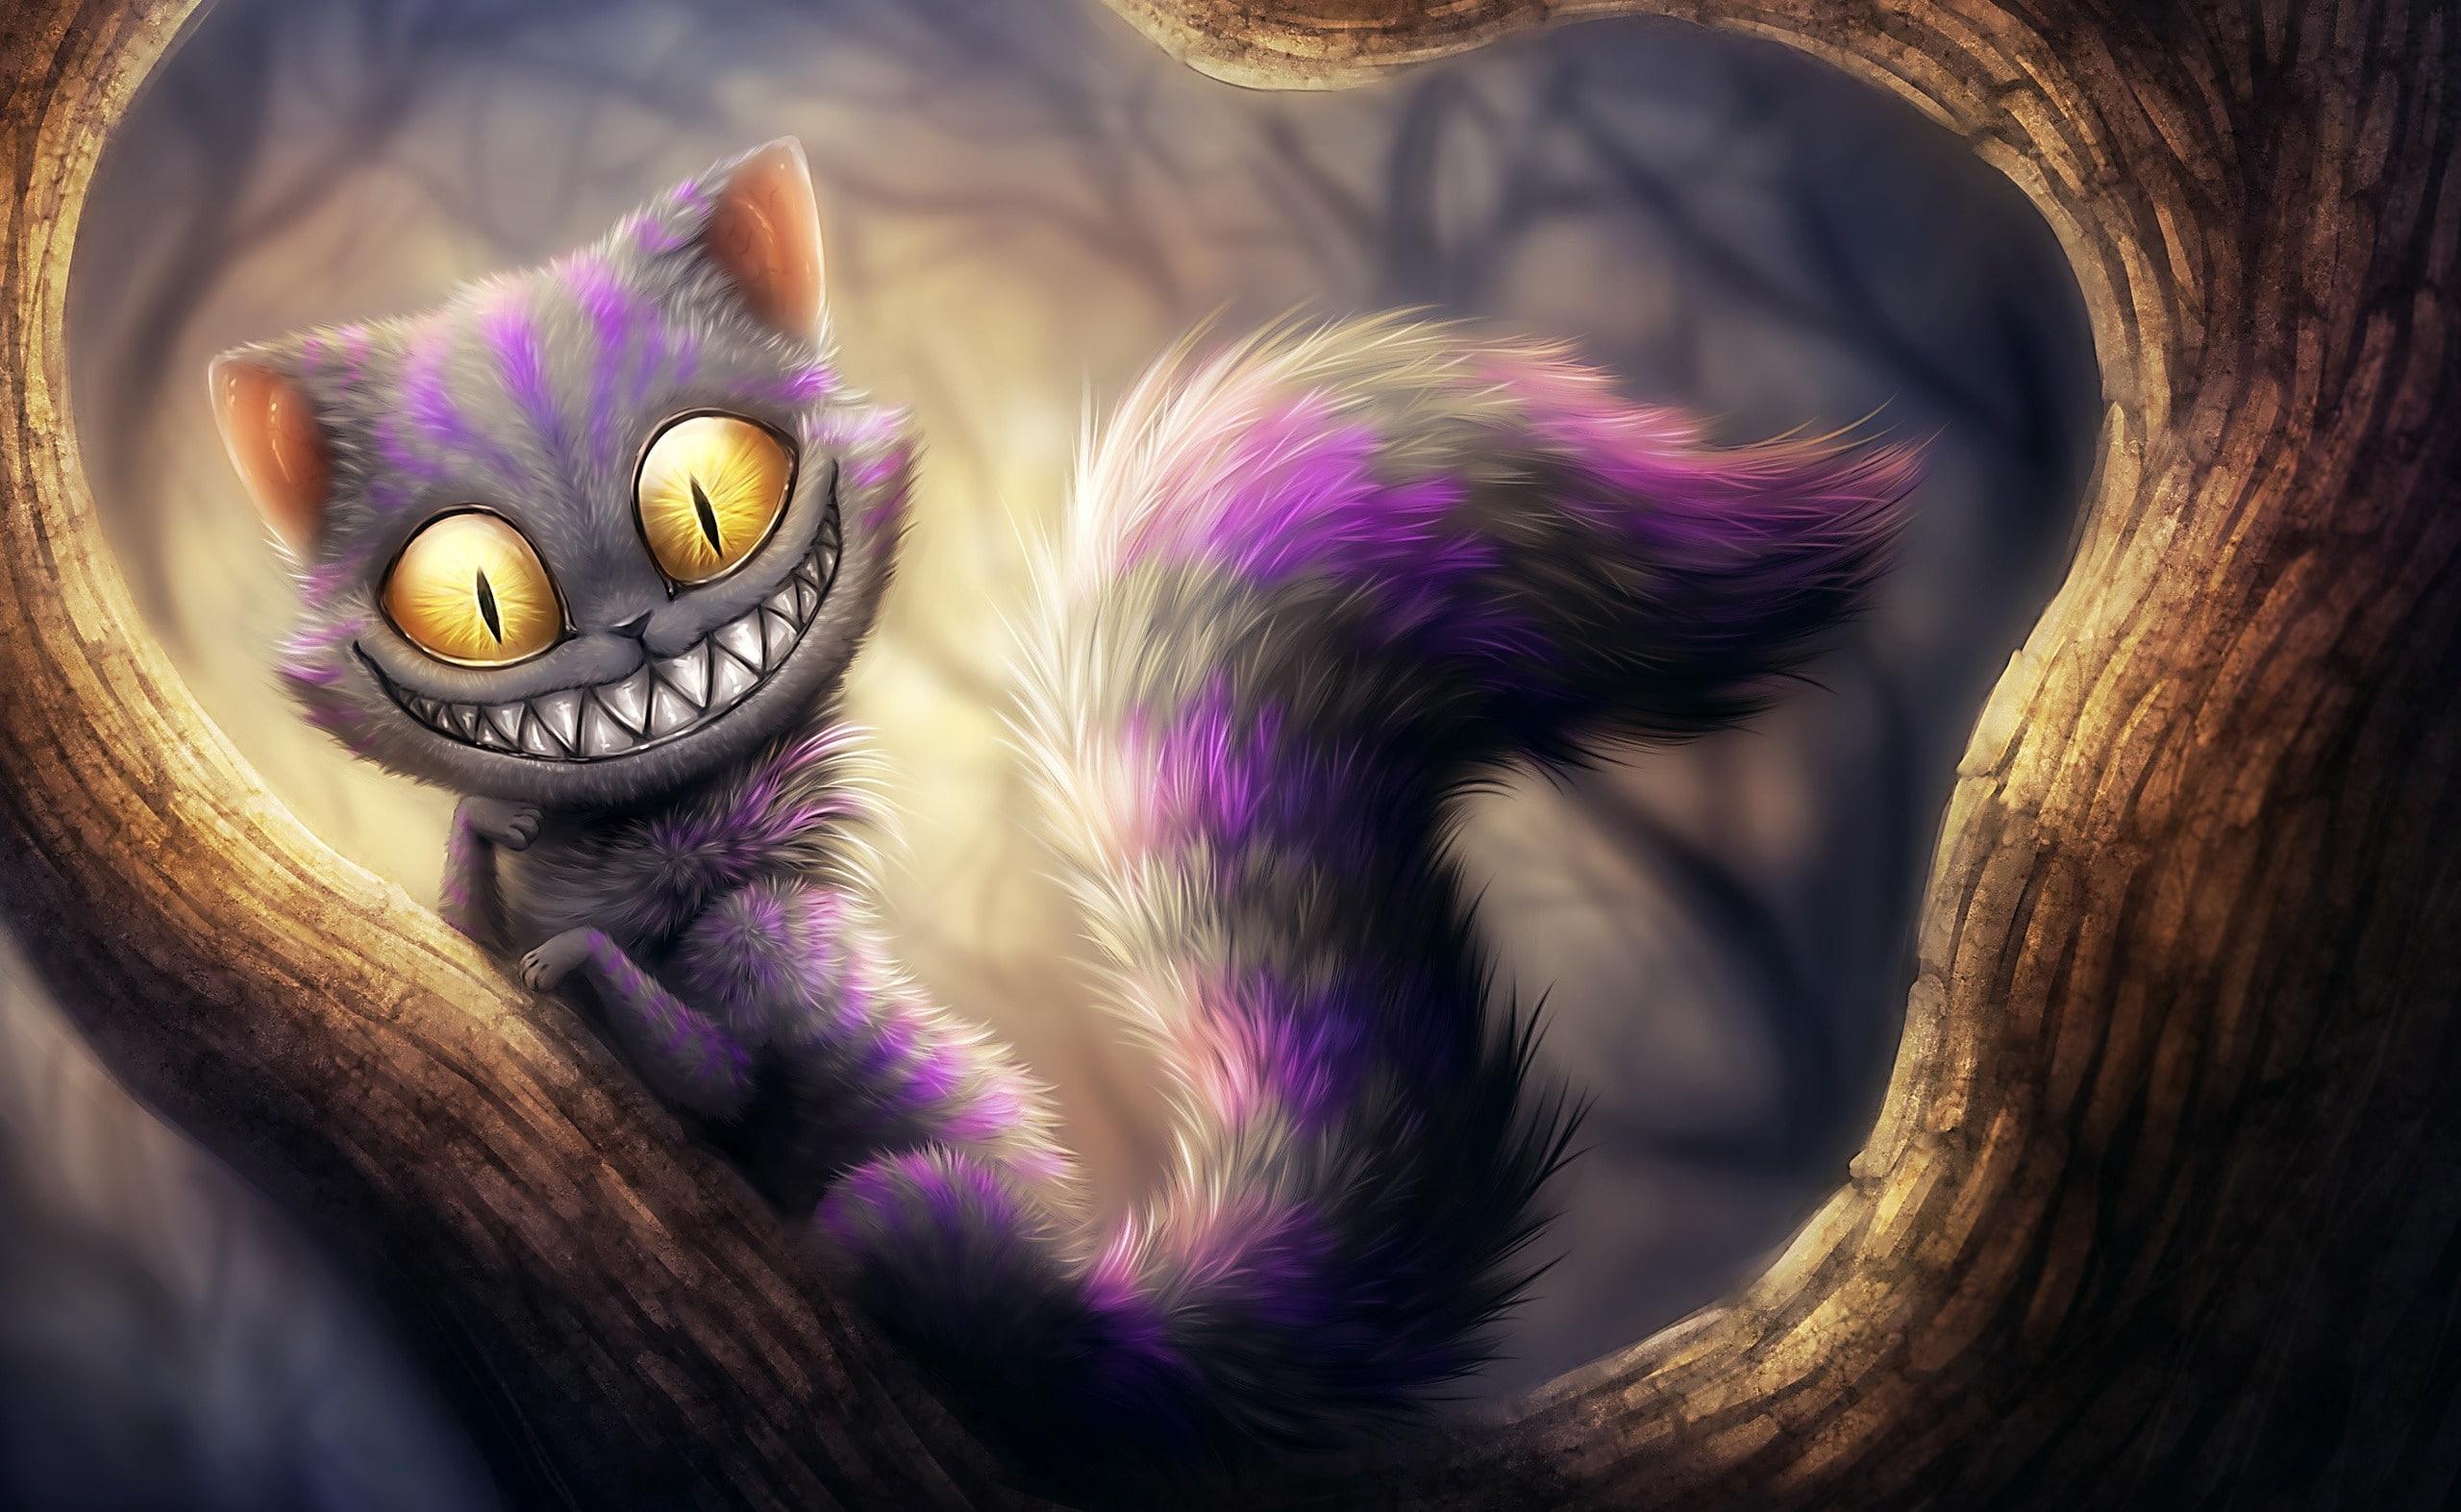 HD wallpaper: Cheshire Cat from Alice Adventures